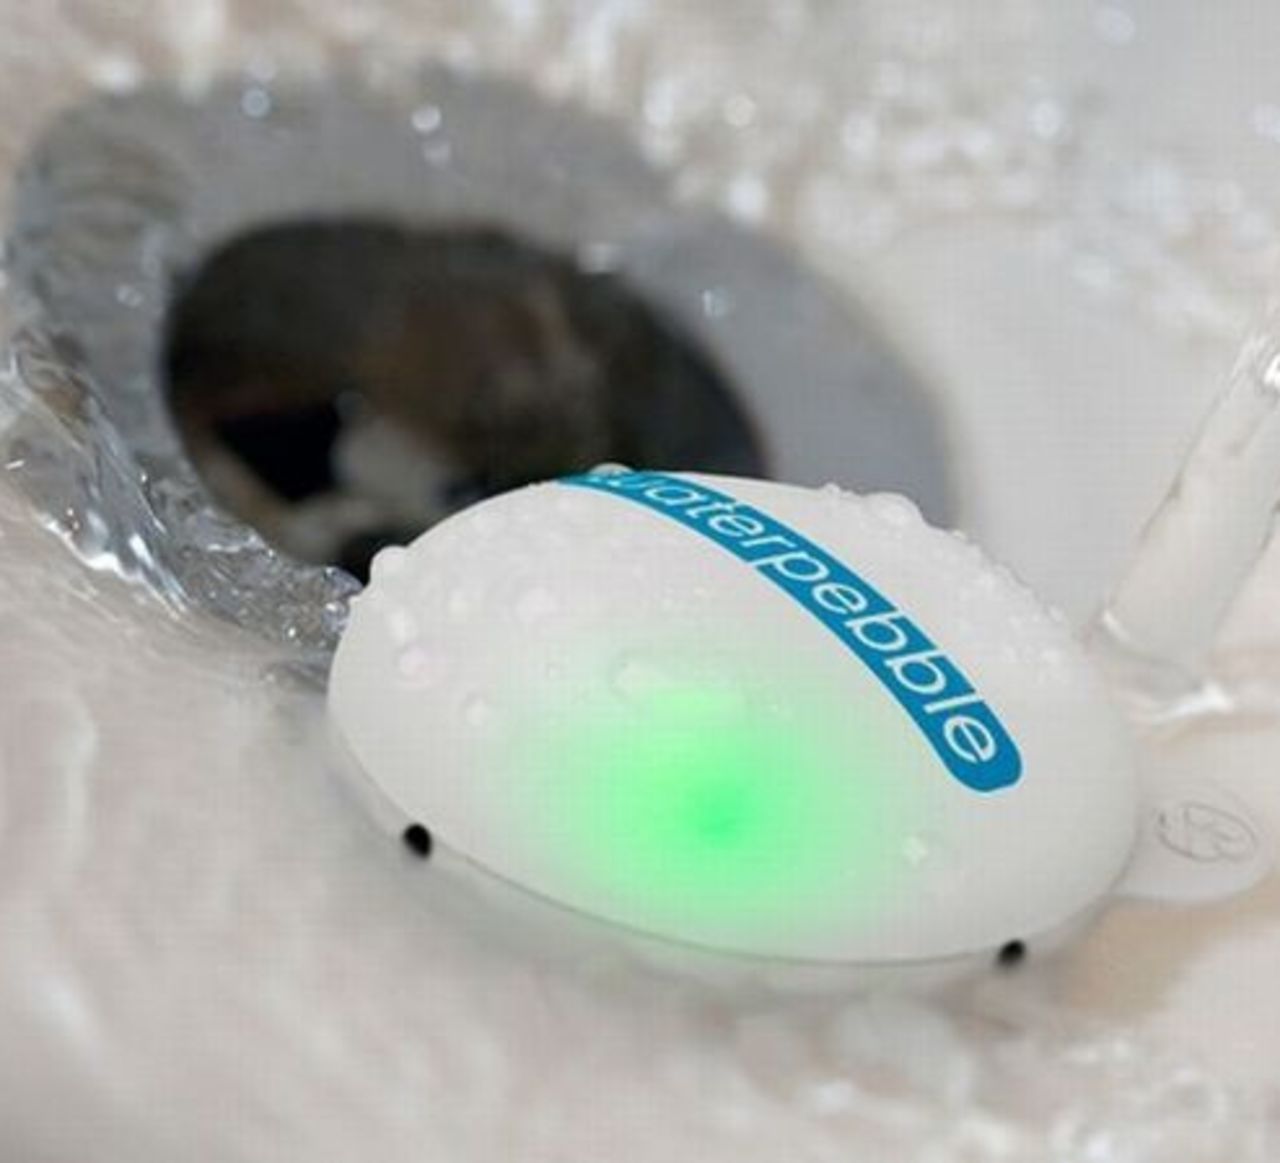 The "Waterpebble" monitors water going down the plughole when you shower and tells you when to finish showering. It memorizes the length of your first shower and, using it as a benchmark, fractionally reduces your shower time, helping you to save water without thinking about it. 